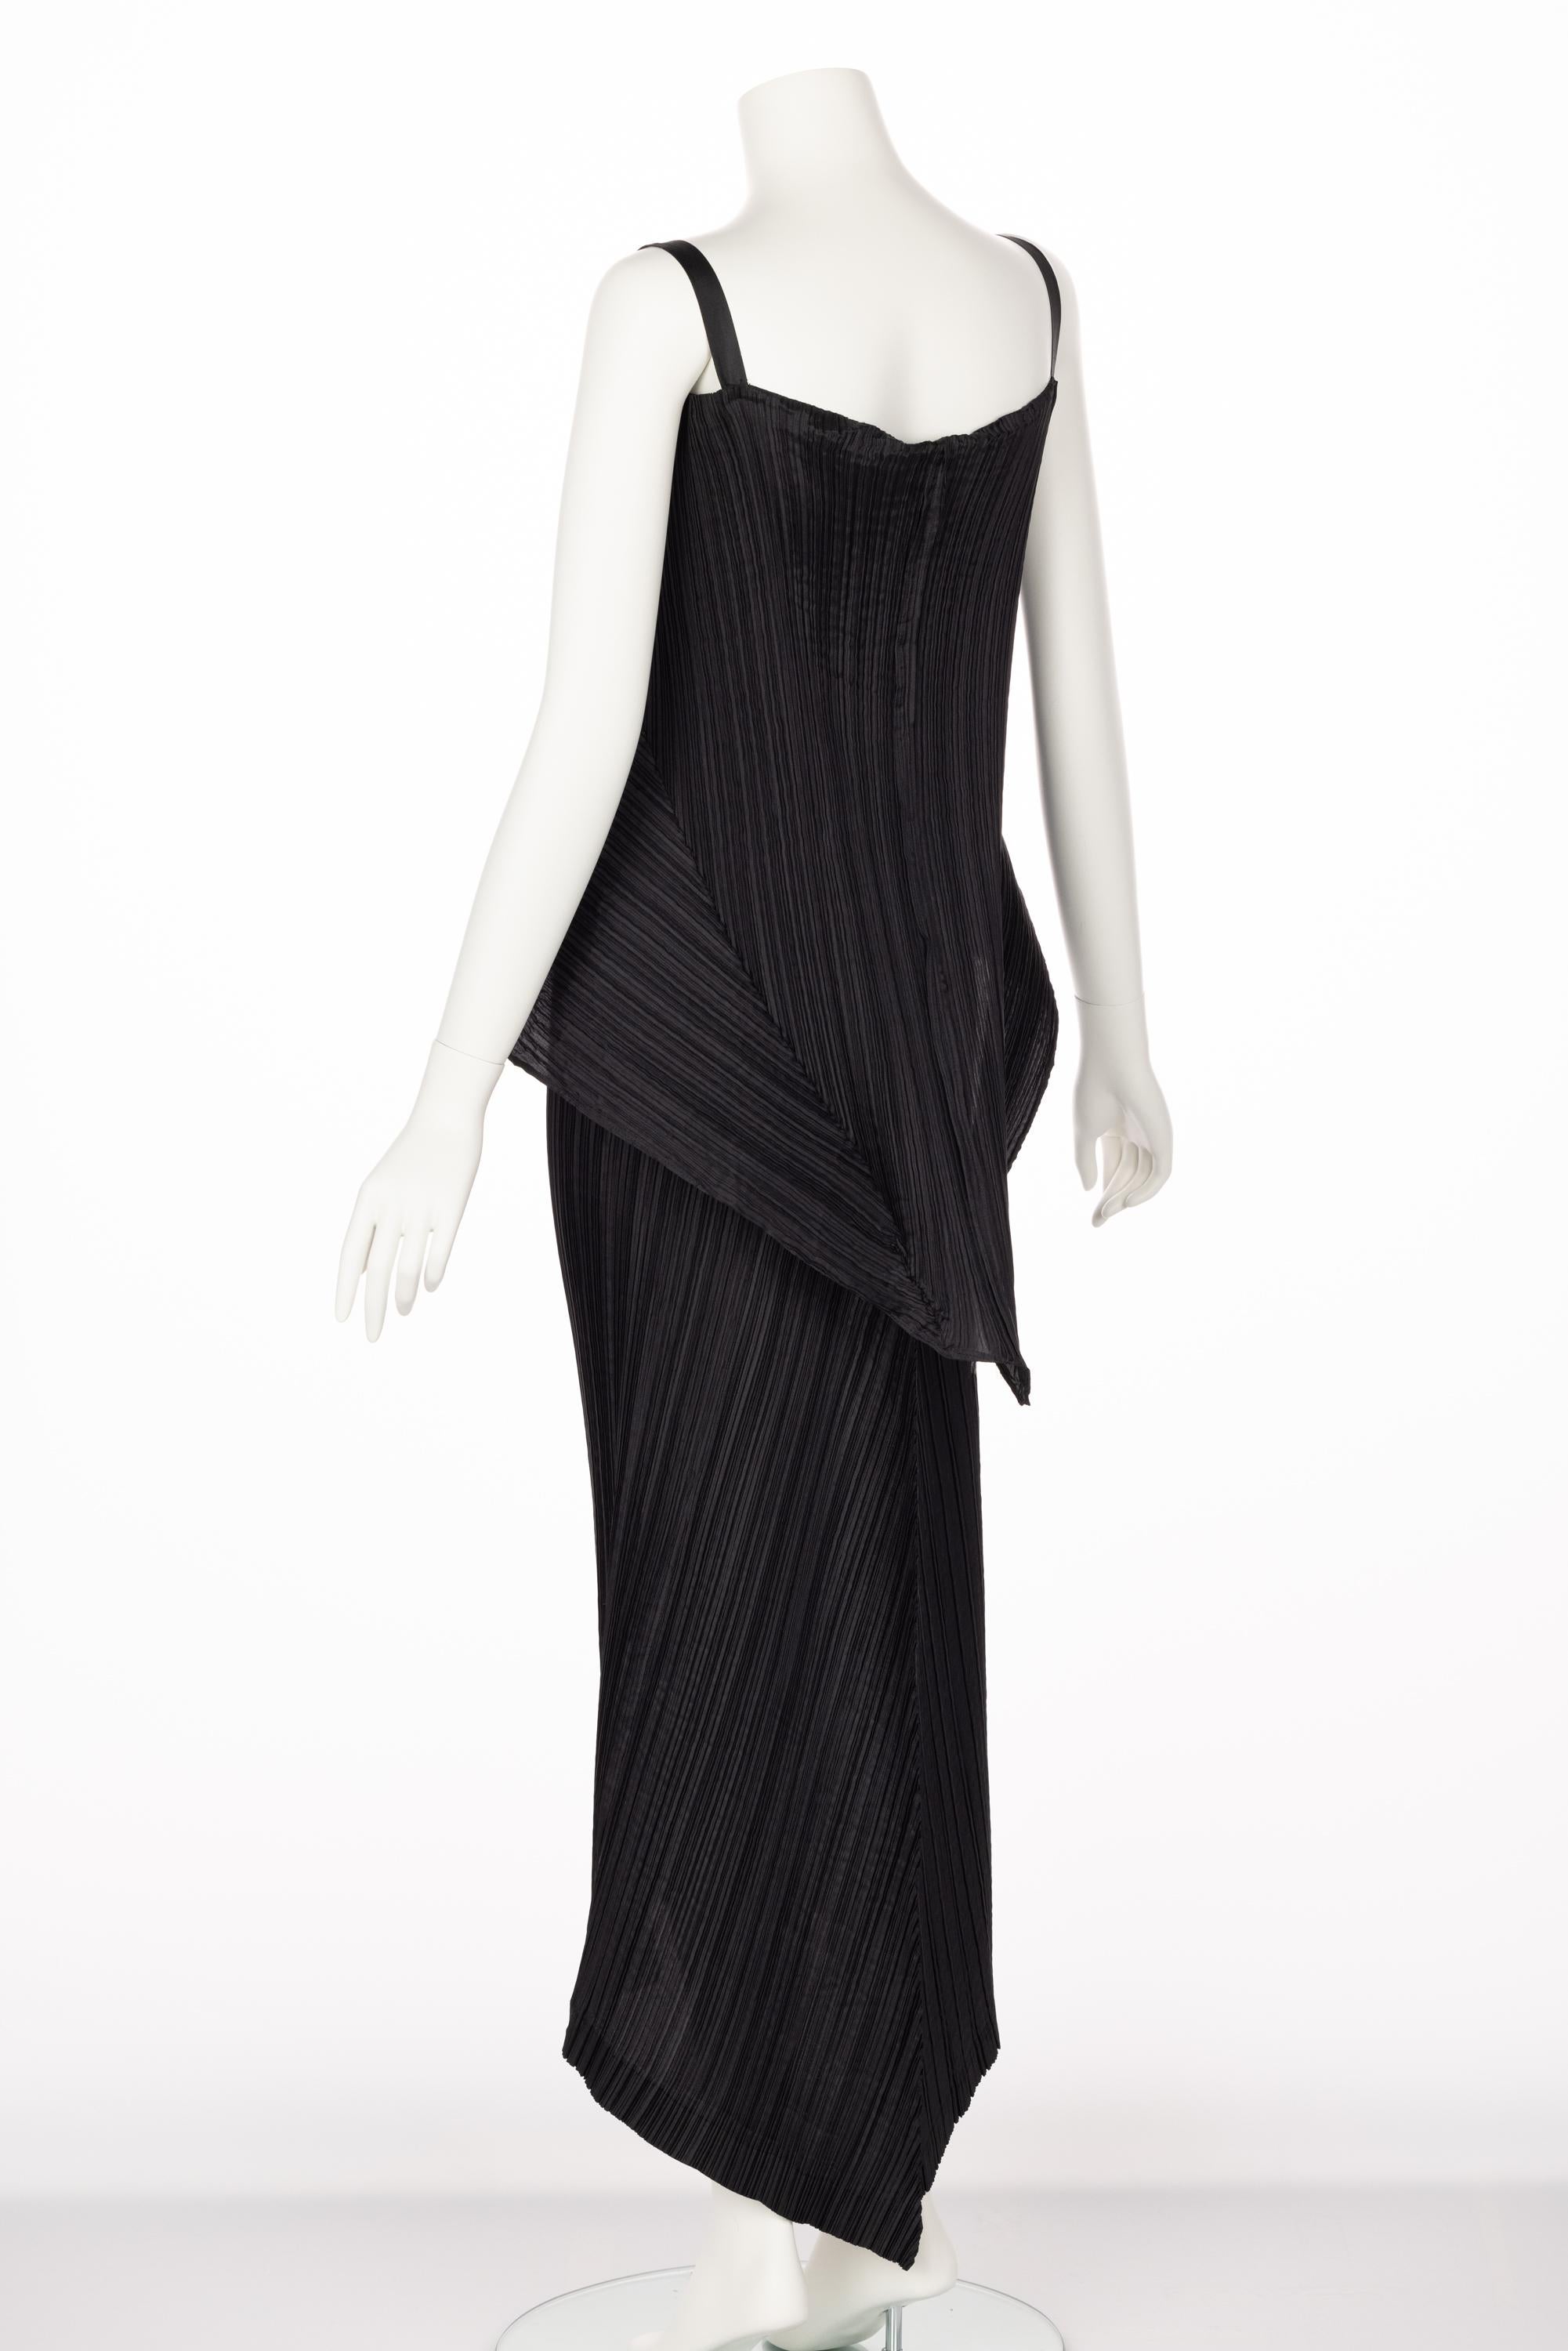 Issey Miyake Black Pleated Sculptural Sleeveless Maxi Dress, 1990s For Sale 1